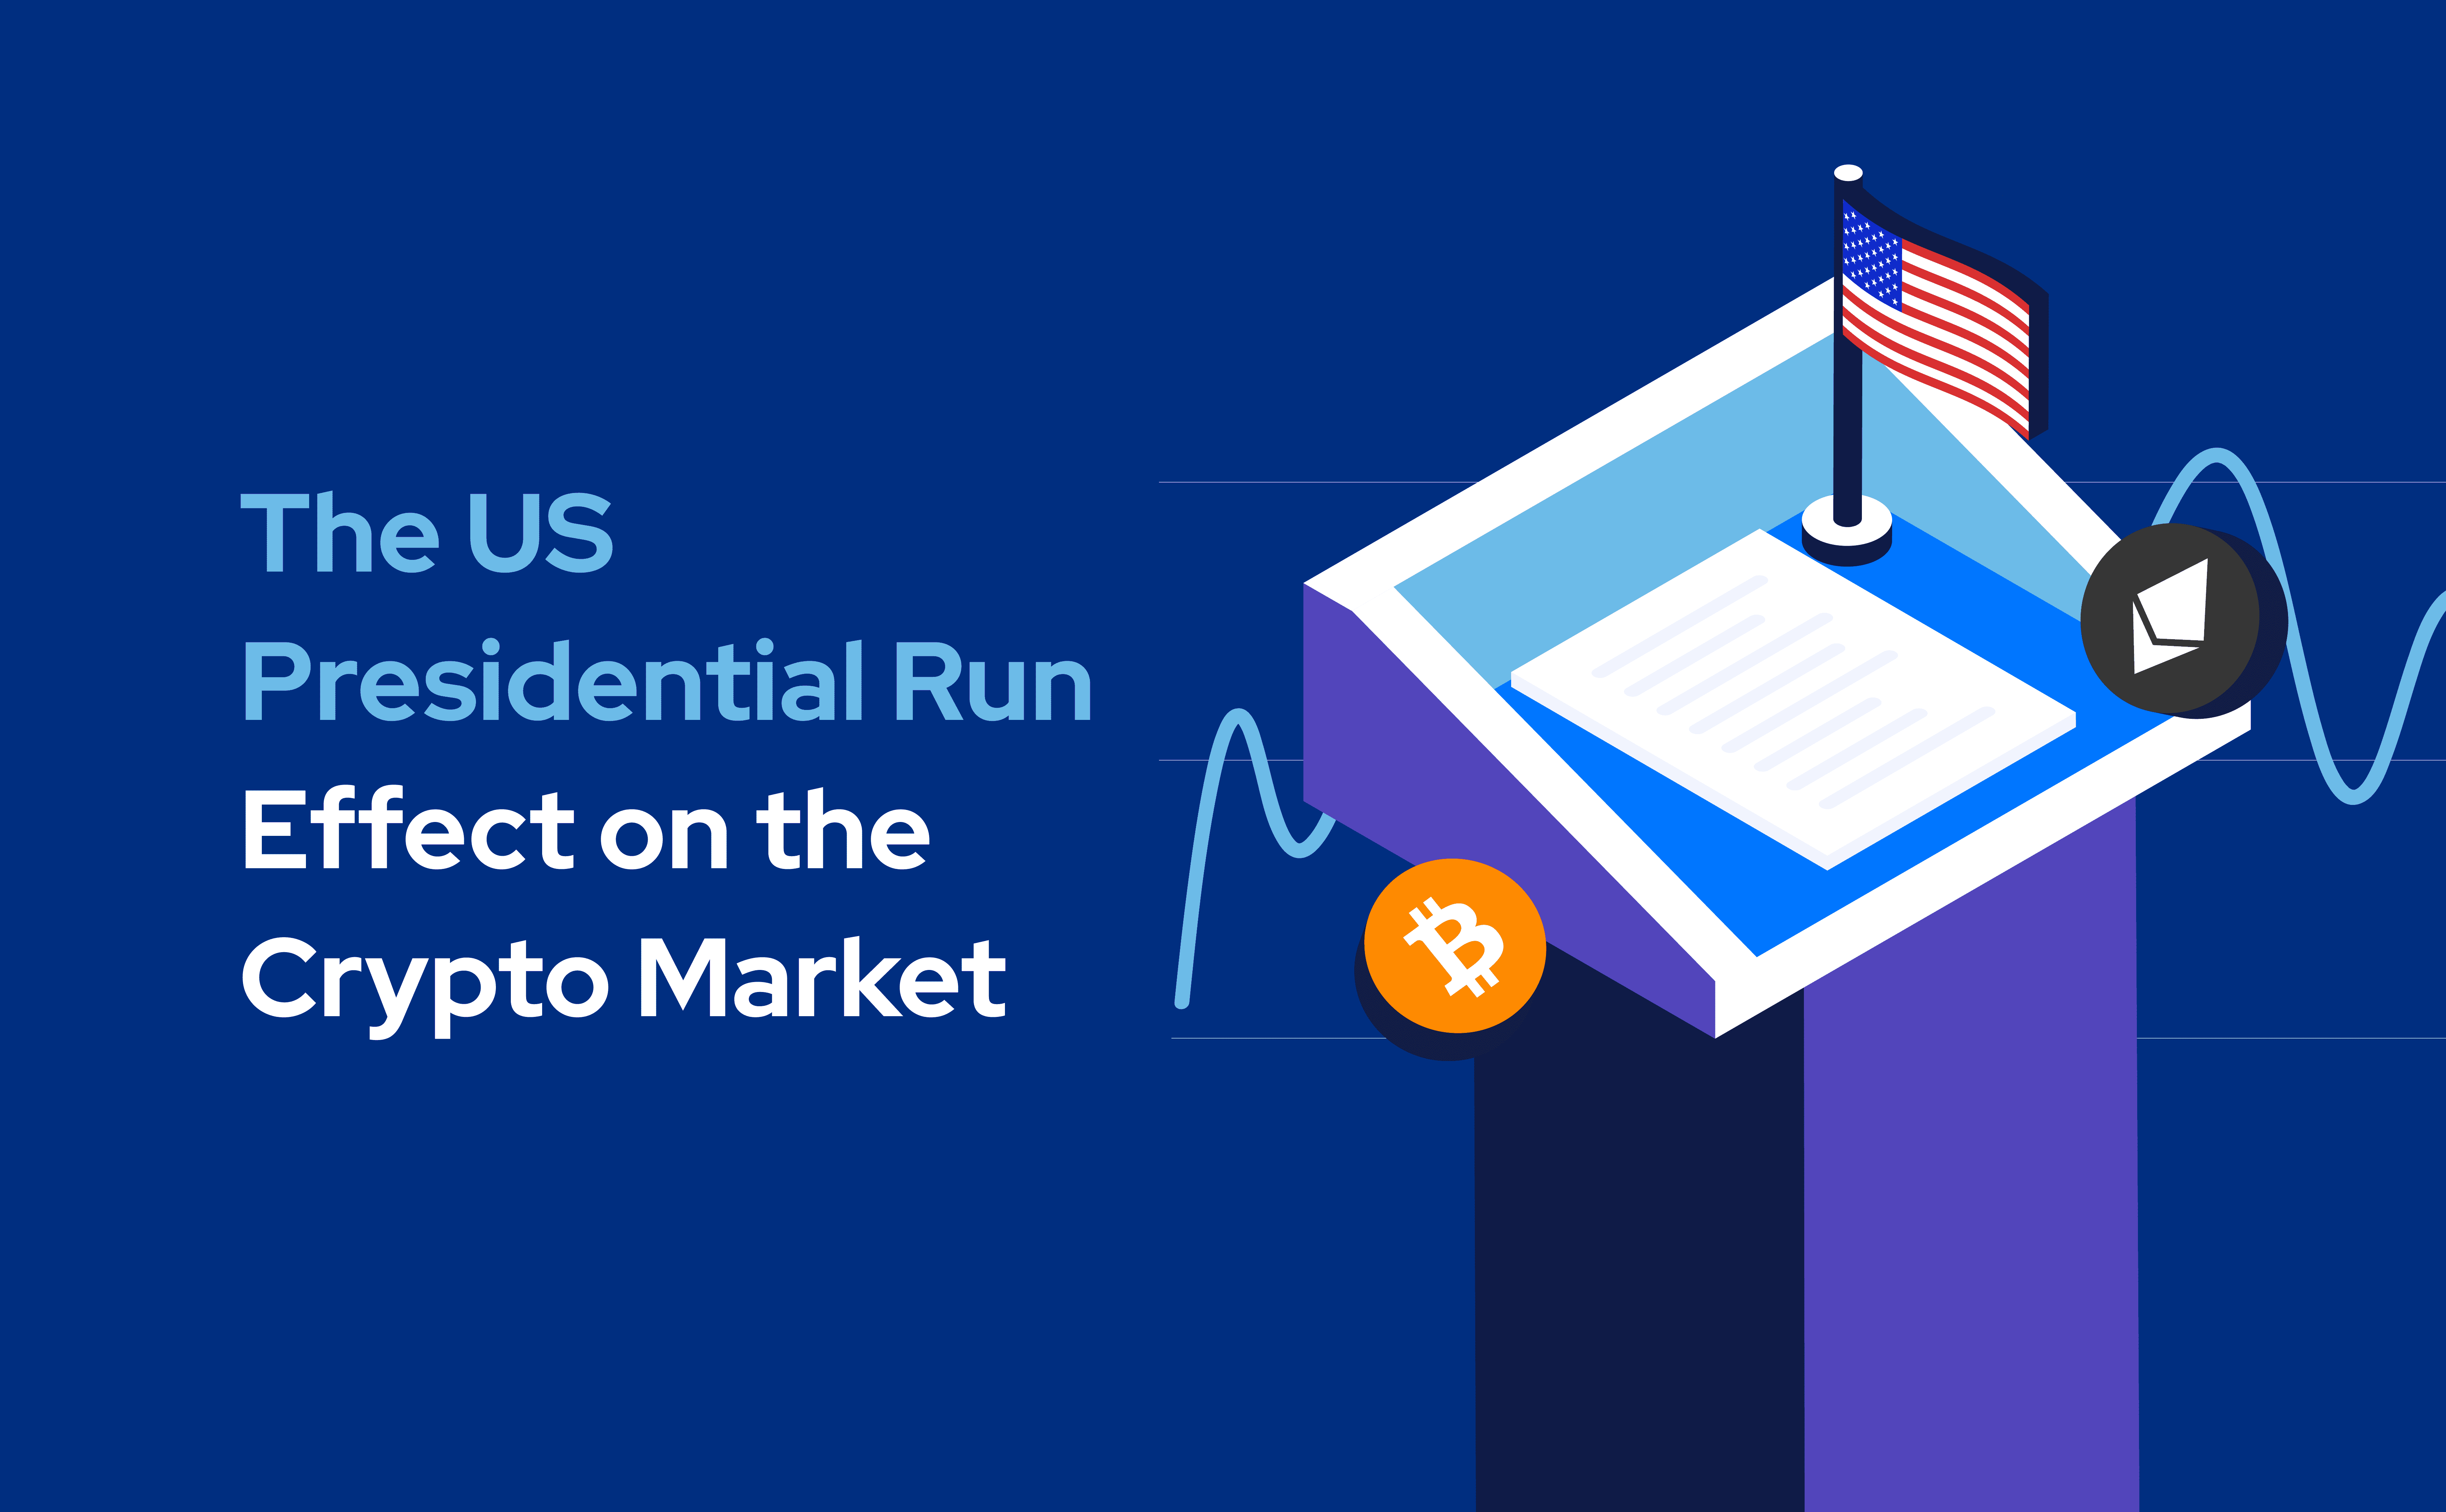 The US Presidential Run Effect on the Crypto Market  